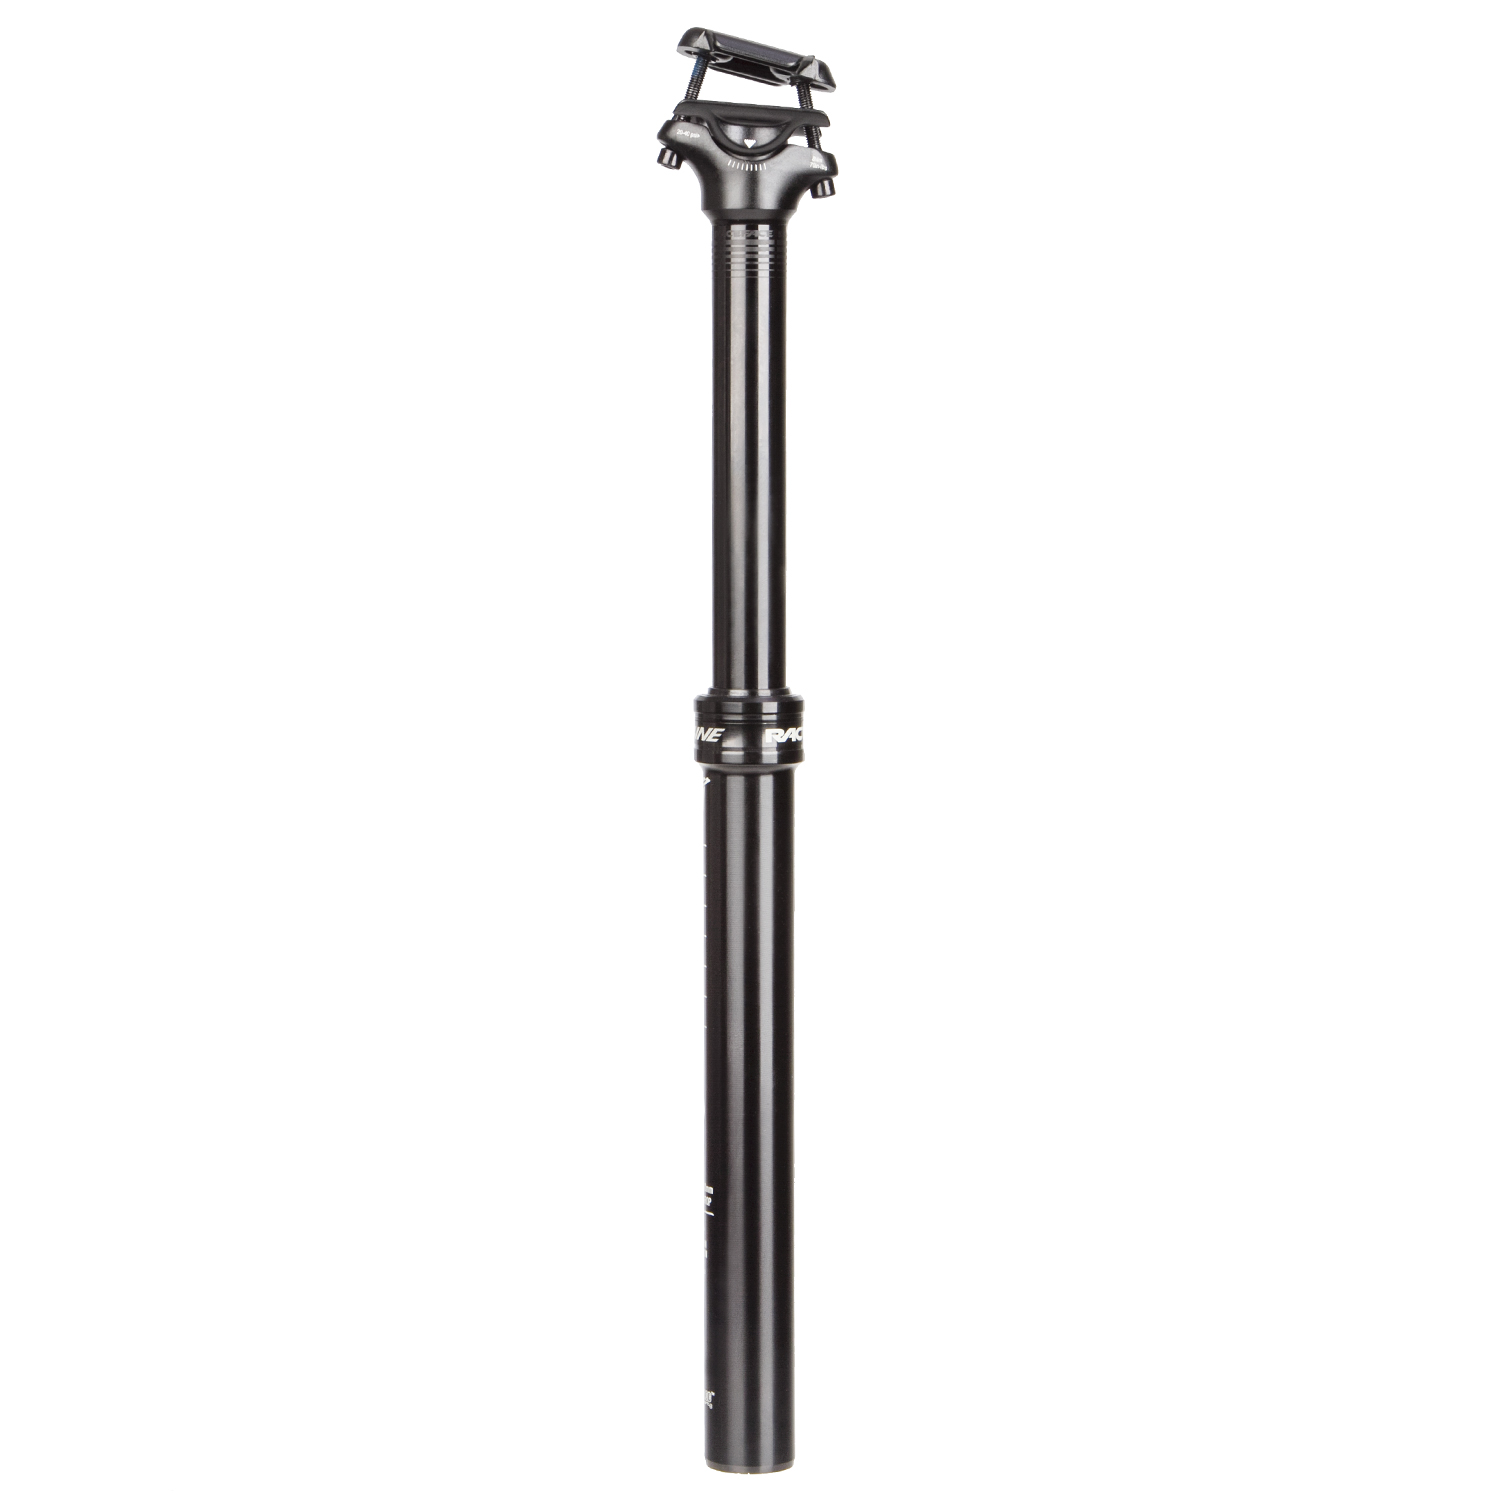 Race Face Seat Post Turbine Dropper Black, 30.9 x 440-150 mm, with Remote